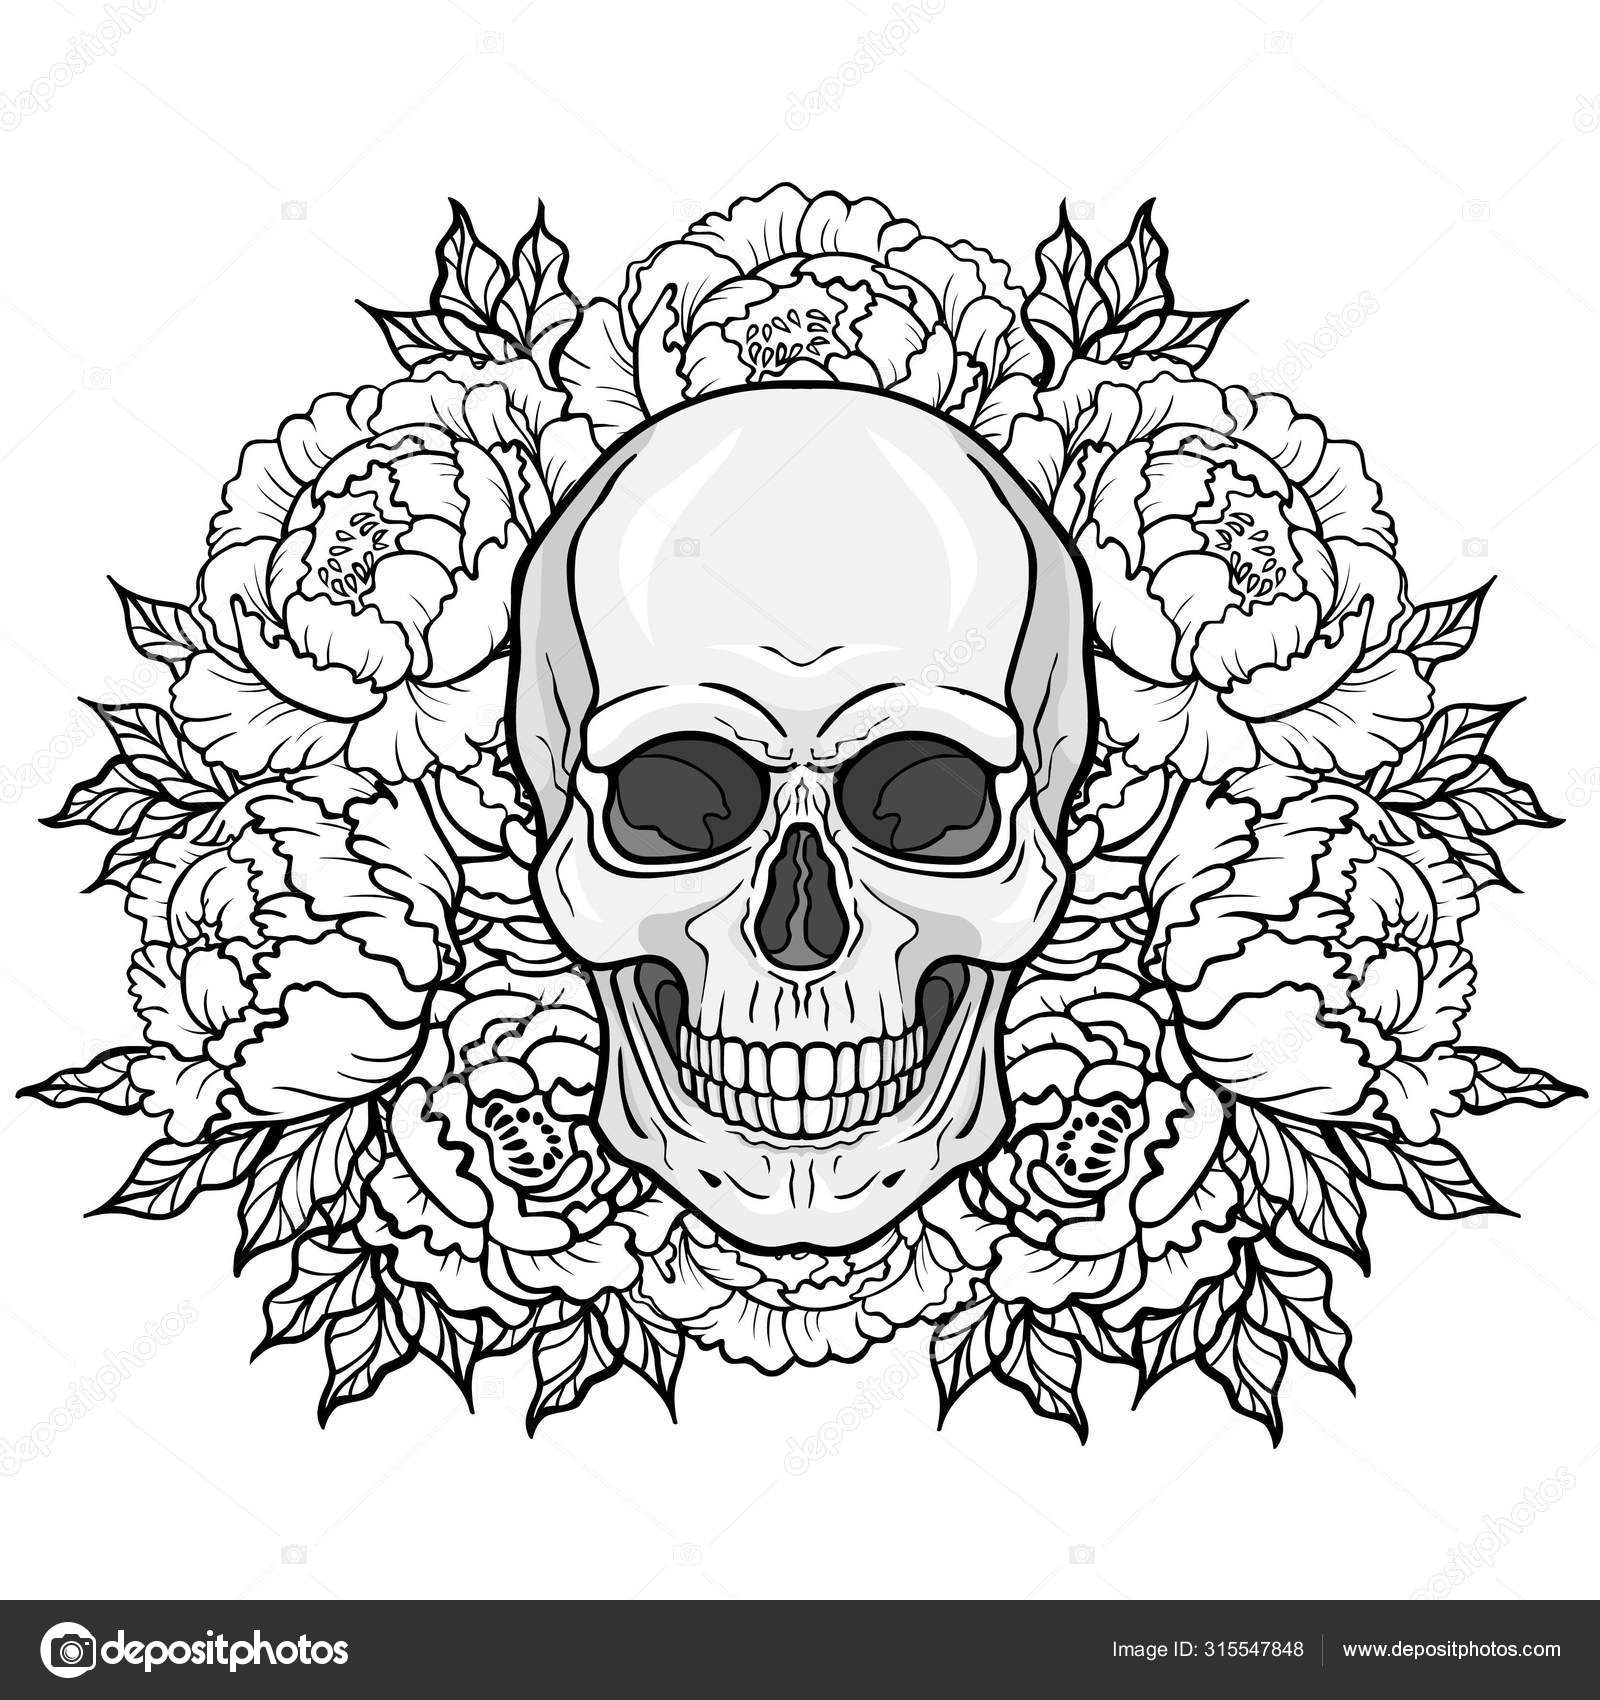 Floral Witch Skull Elements antique illustrations of human skulls and flowers PNG clipart instant download for commercial use